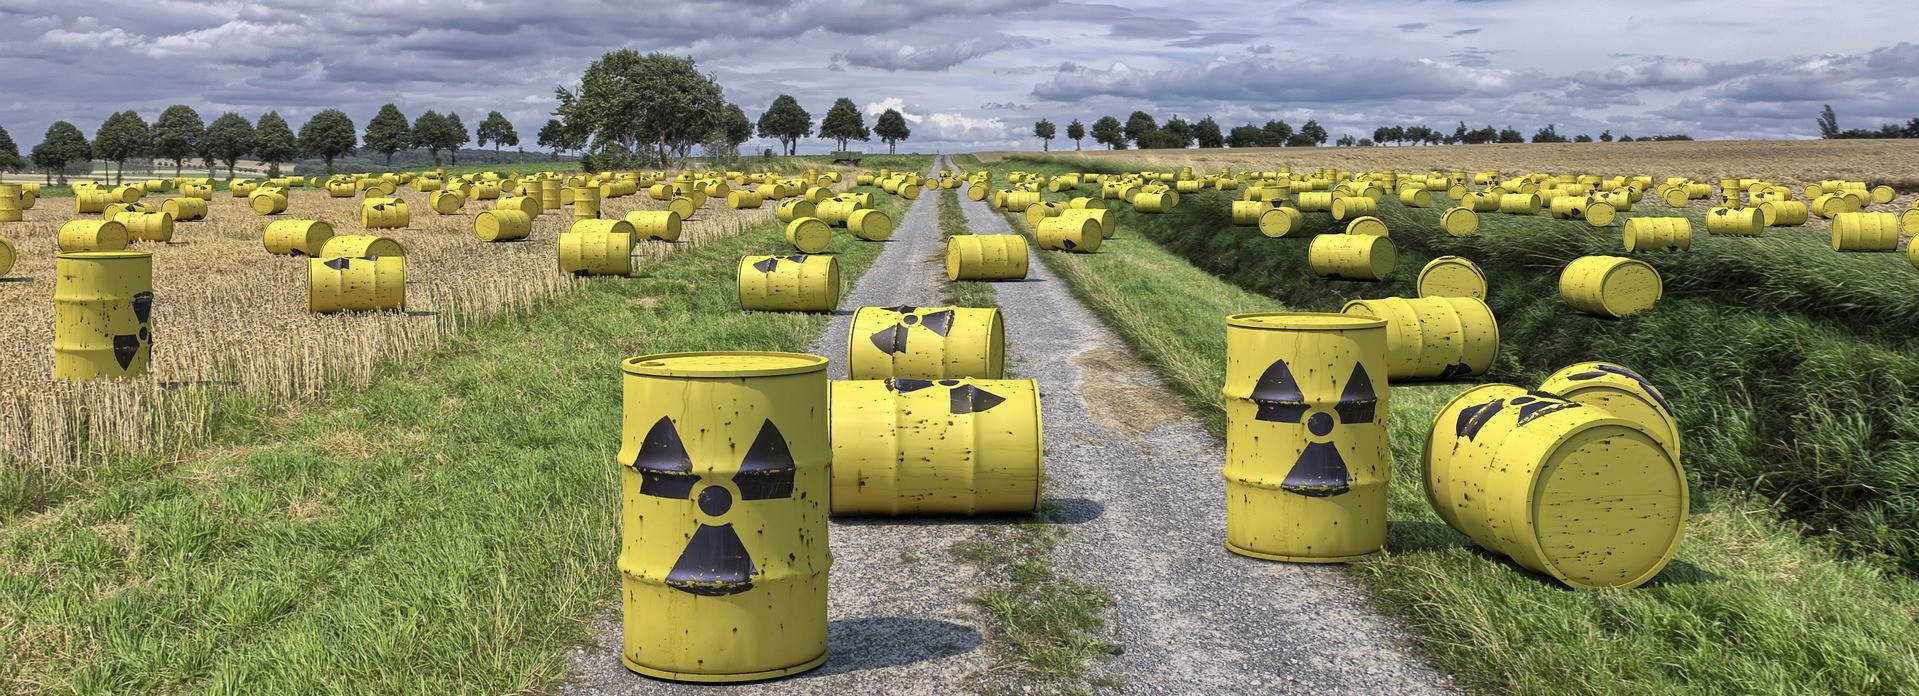 nuclear-waste-1471361_1920